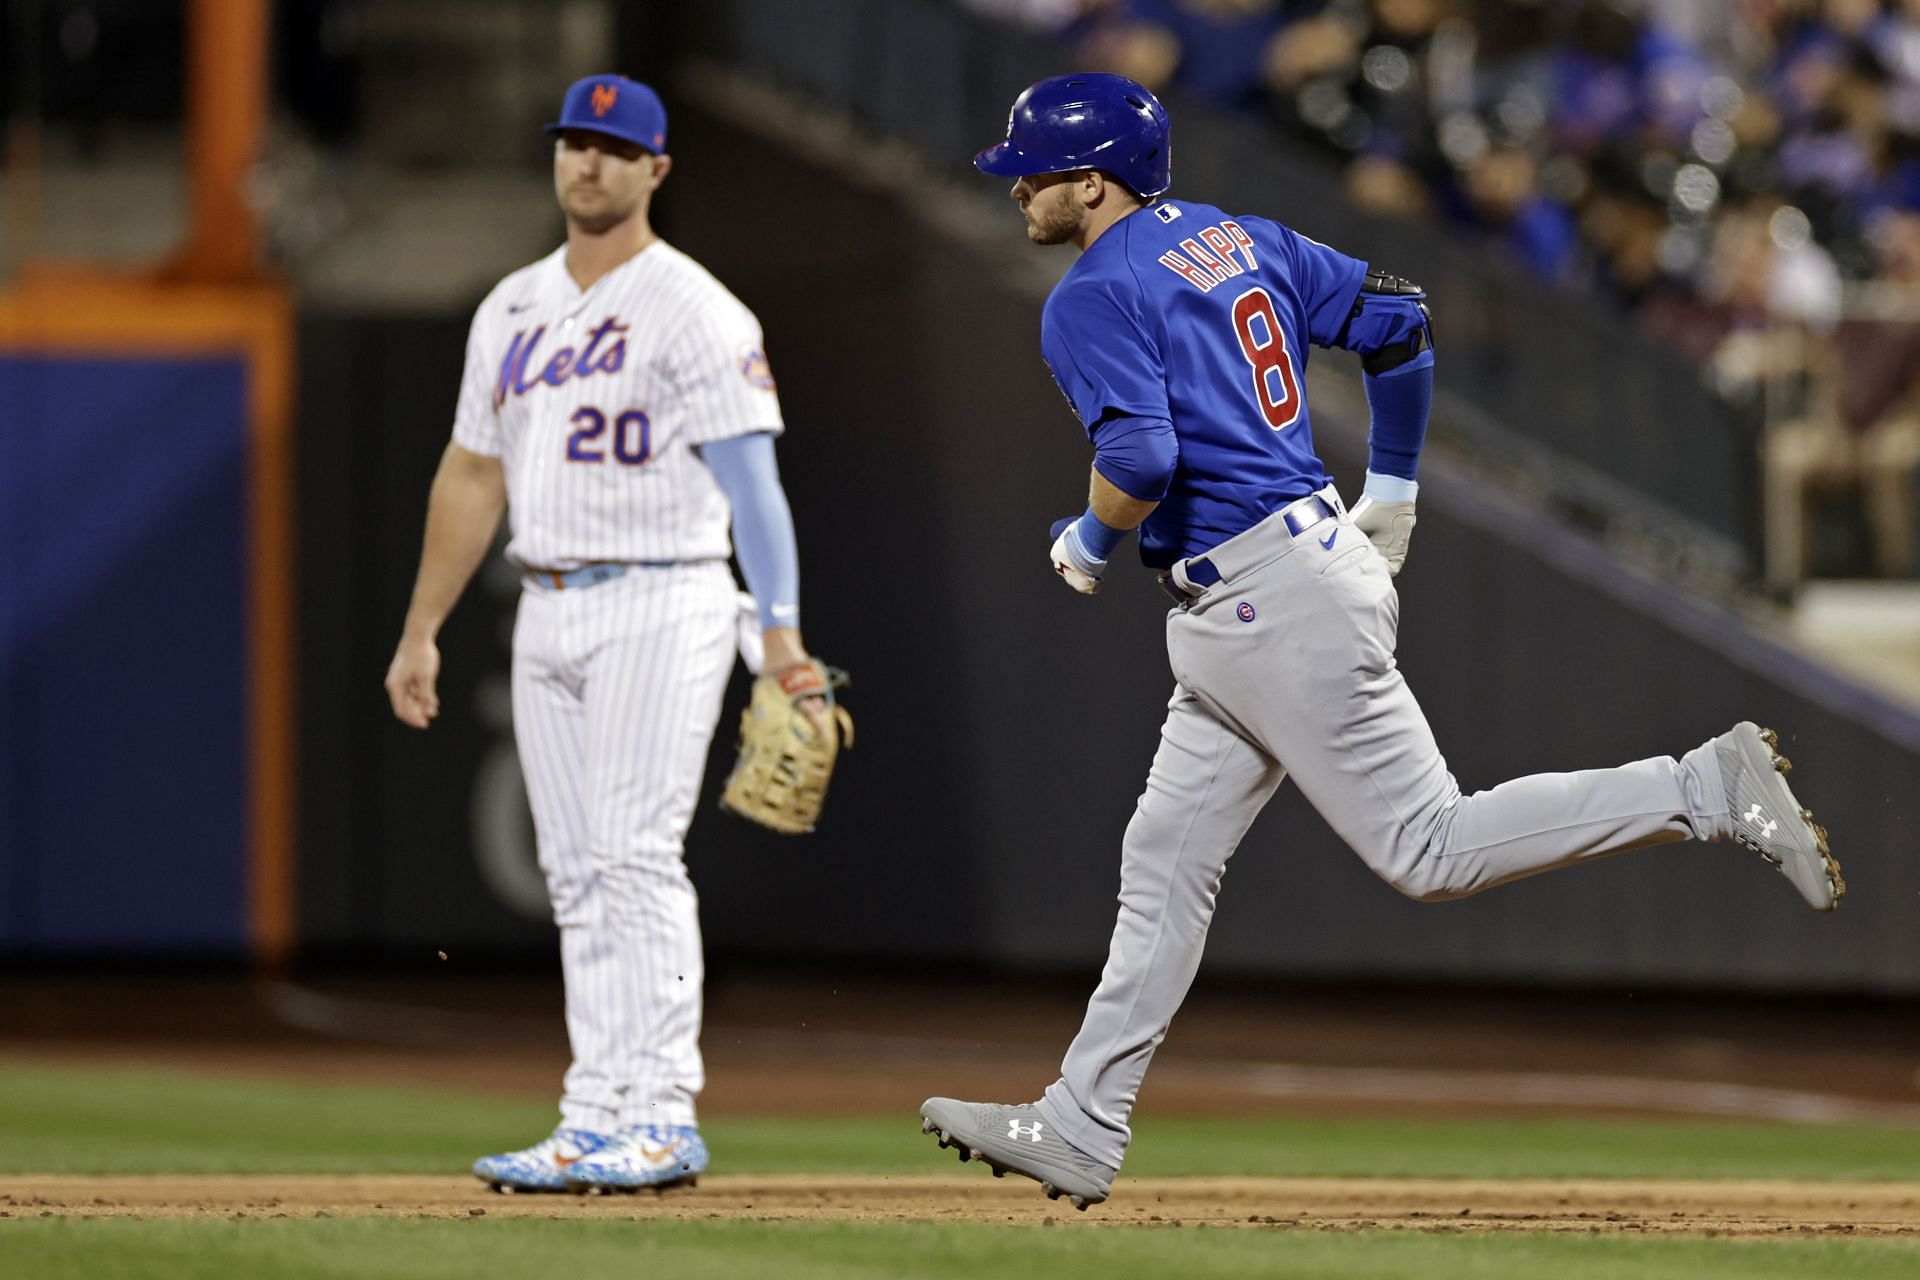 Mets lose low-scoring game to Cubs - Amazin' Avenue